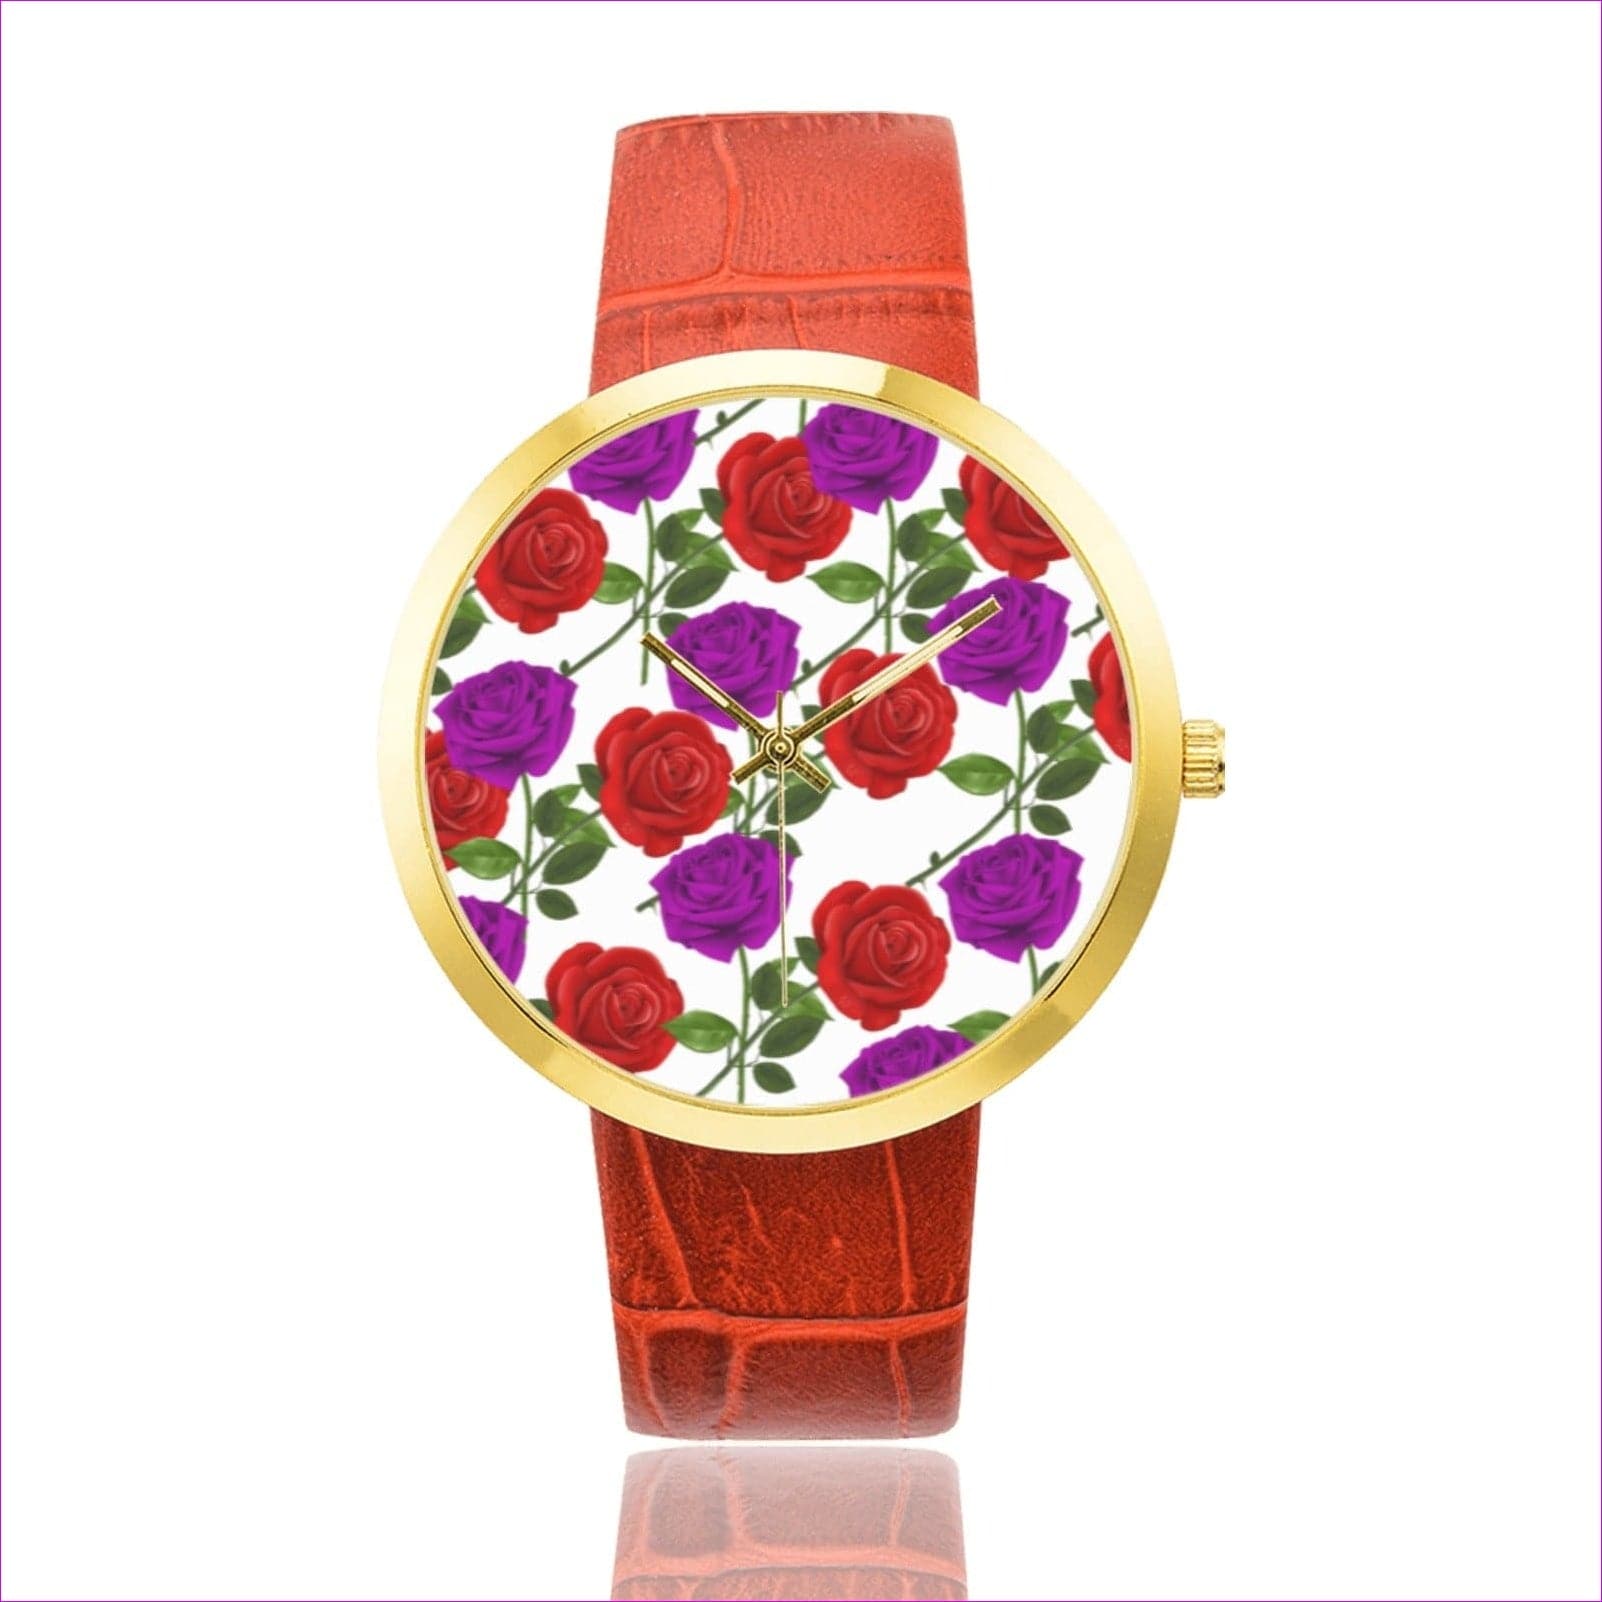 One Size red rose purp Women's Golden Leather Strap Watch (Model 212) - Red Rose Purp Women's Golden Leather Strap Watch - watch at TFC&H Co.